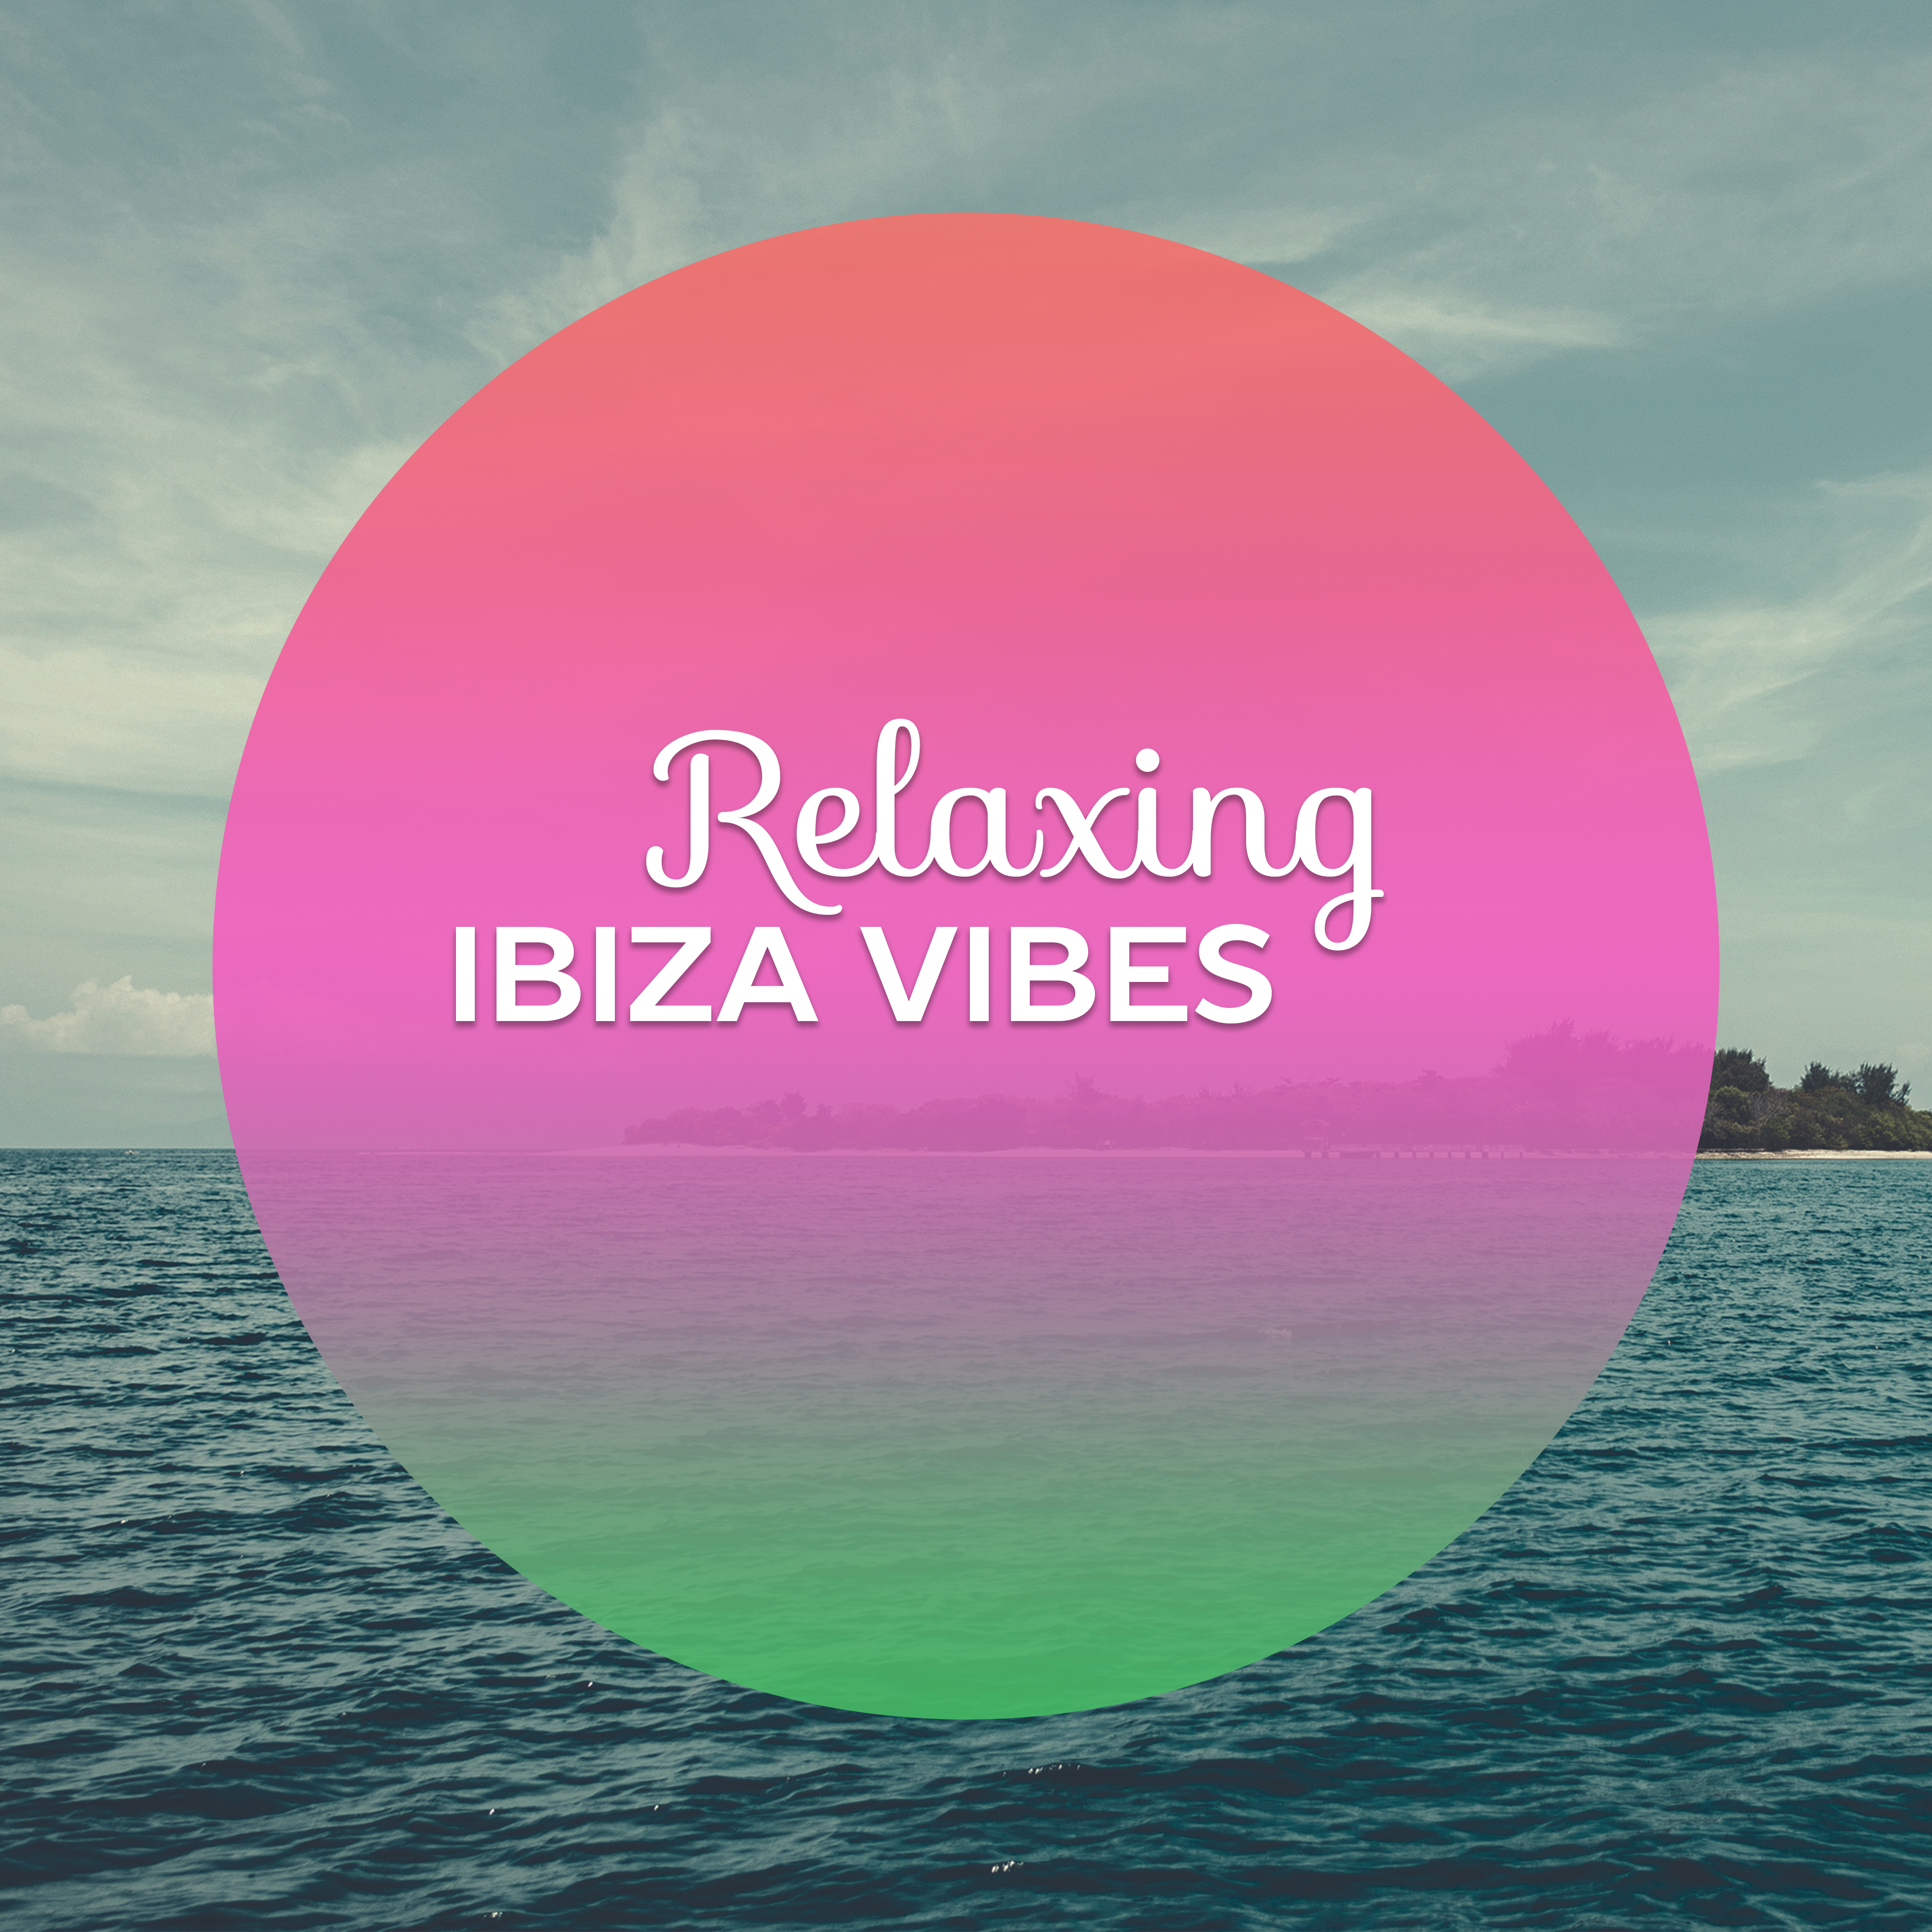 Relaxing Ibiza Vibes – Sensual Chill Out Music, Ibiza Lounge, Summer Time, Waves of Calmness